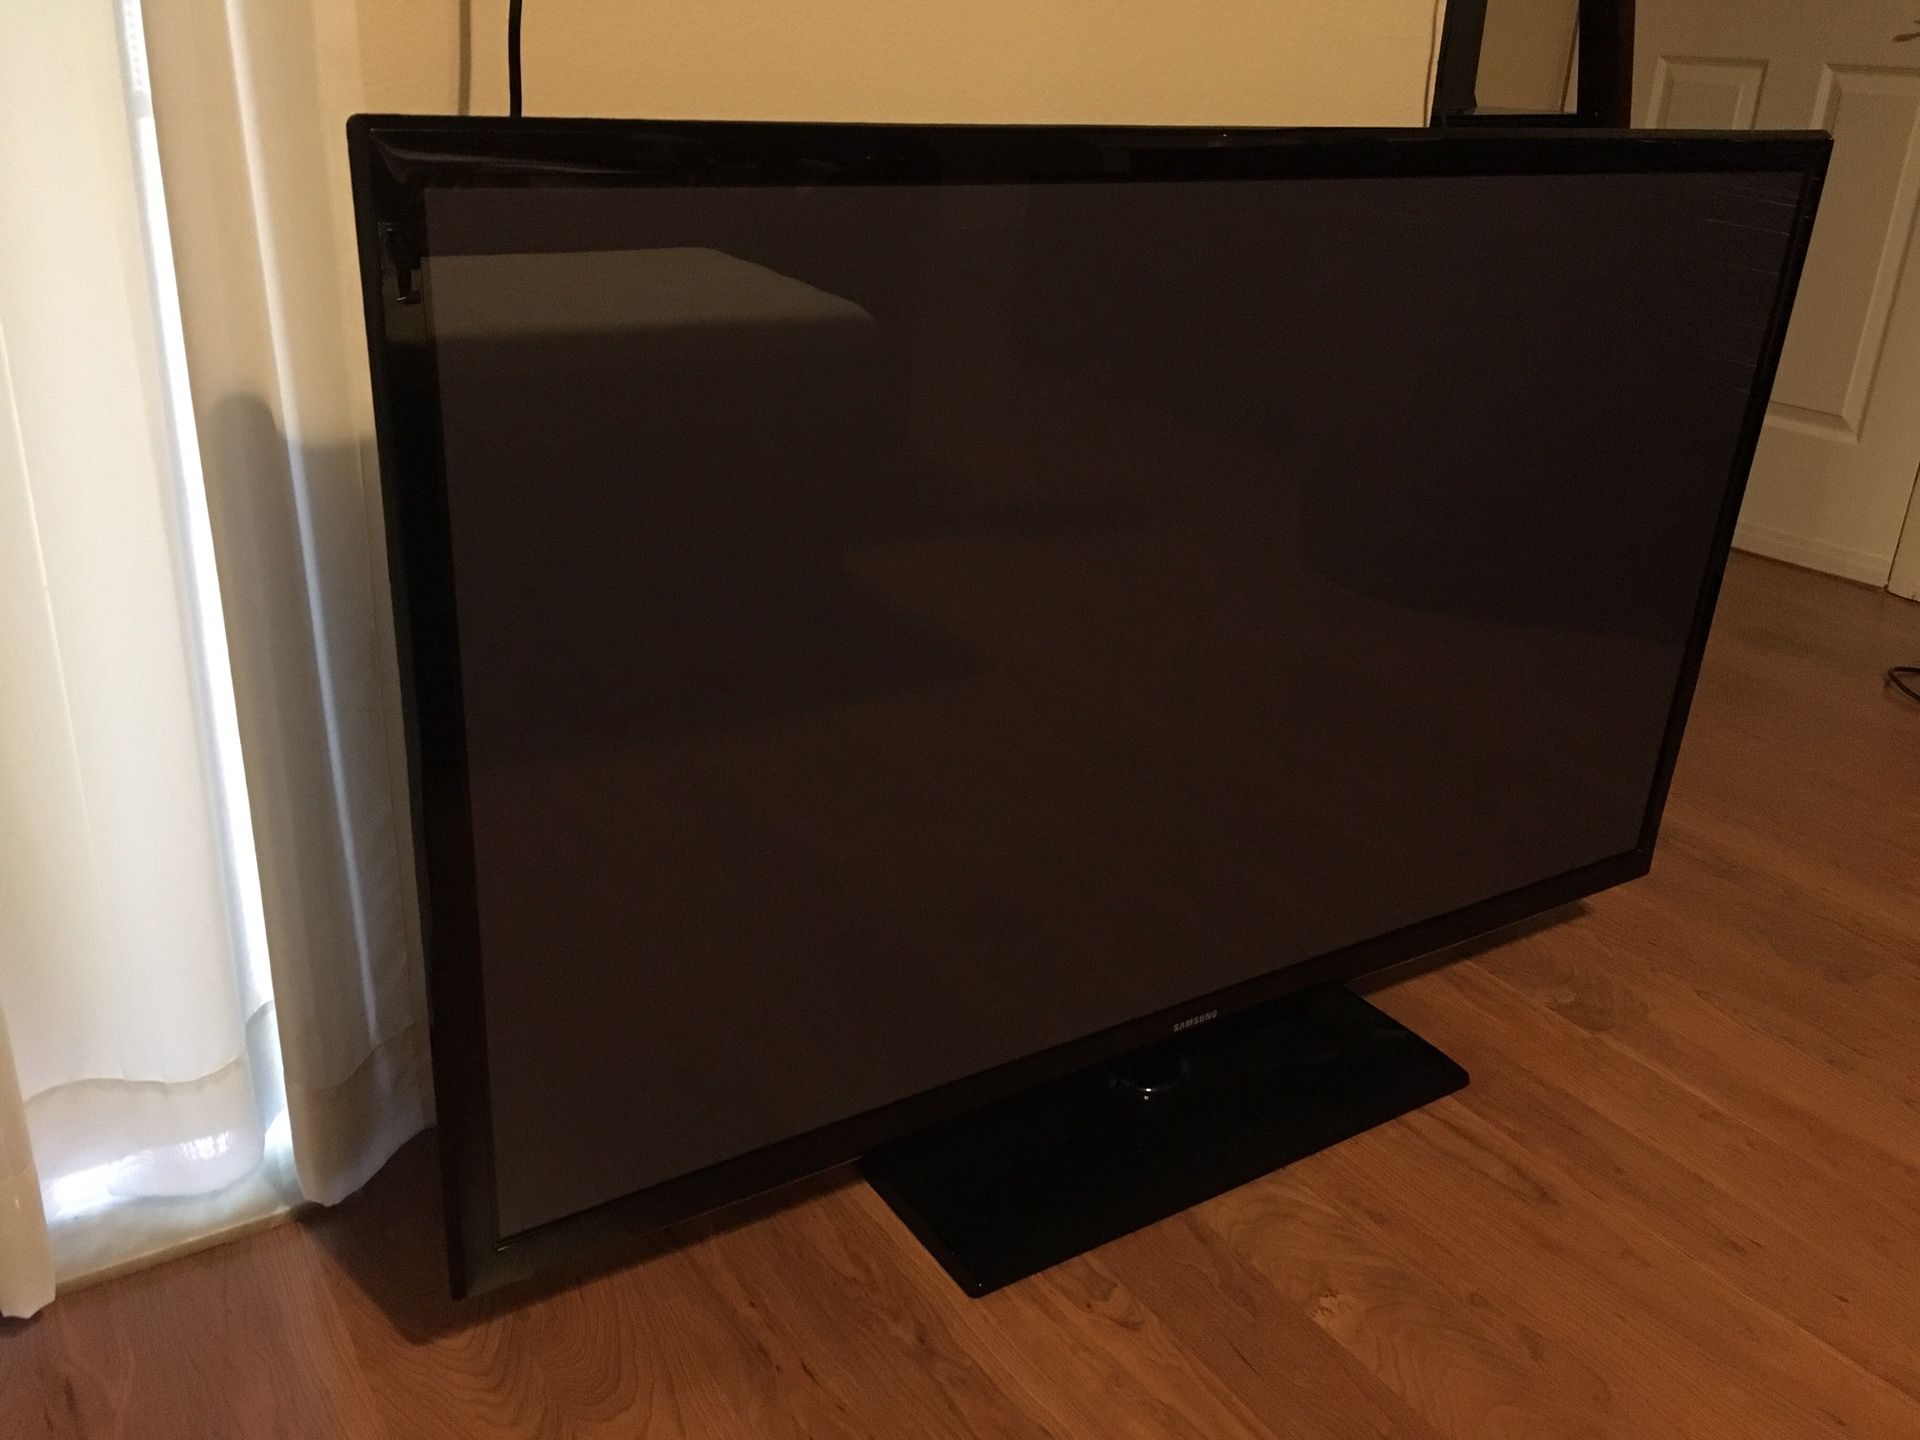 Samsung 51” plasma DOES NOT TURN ON. Sold for parts.